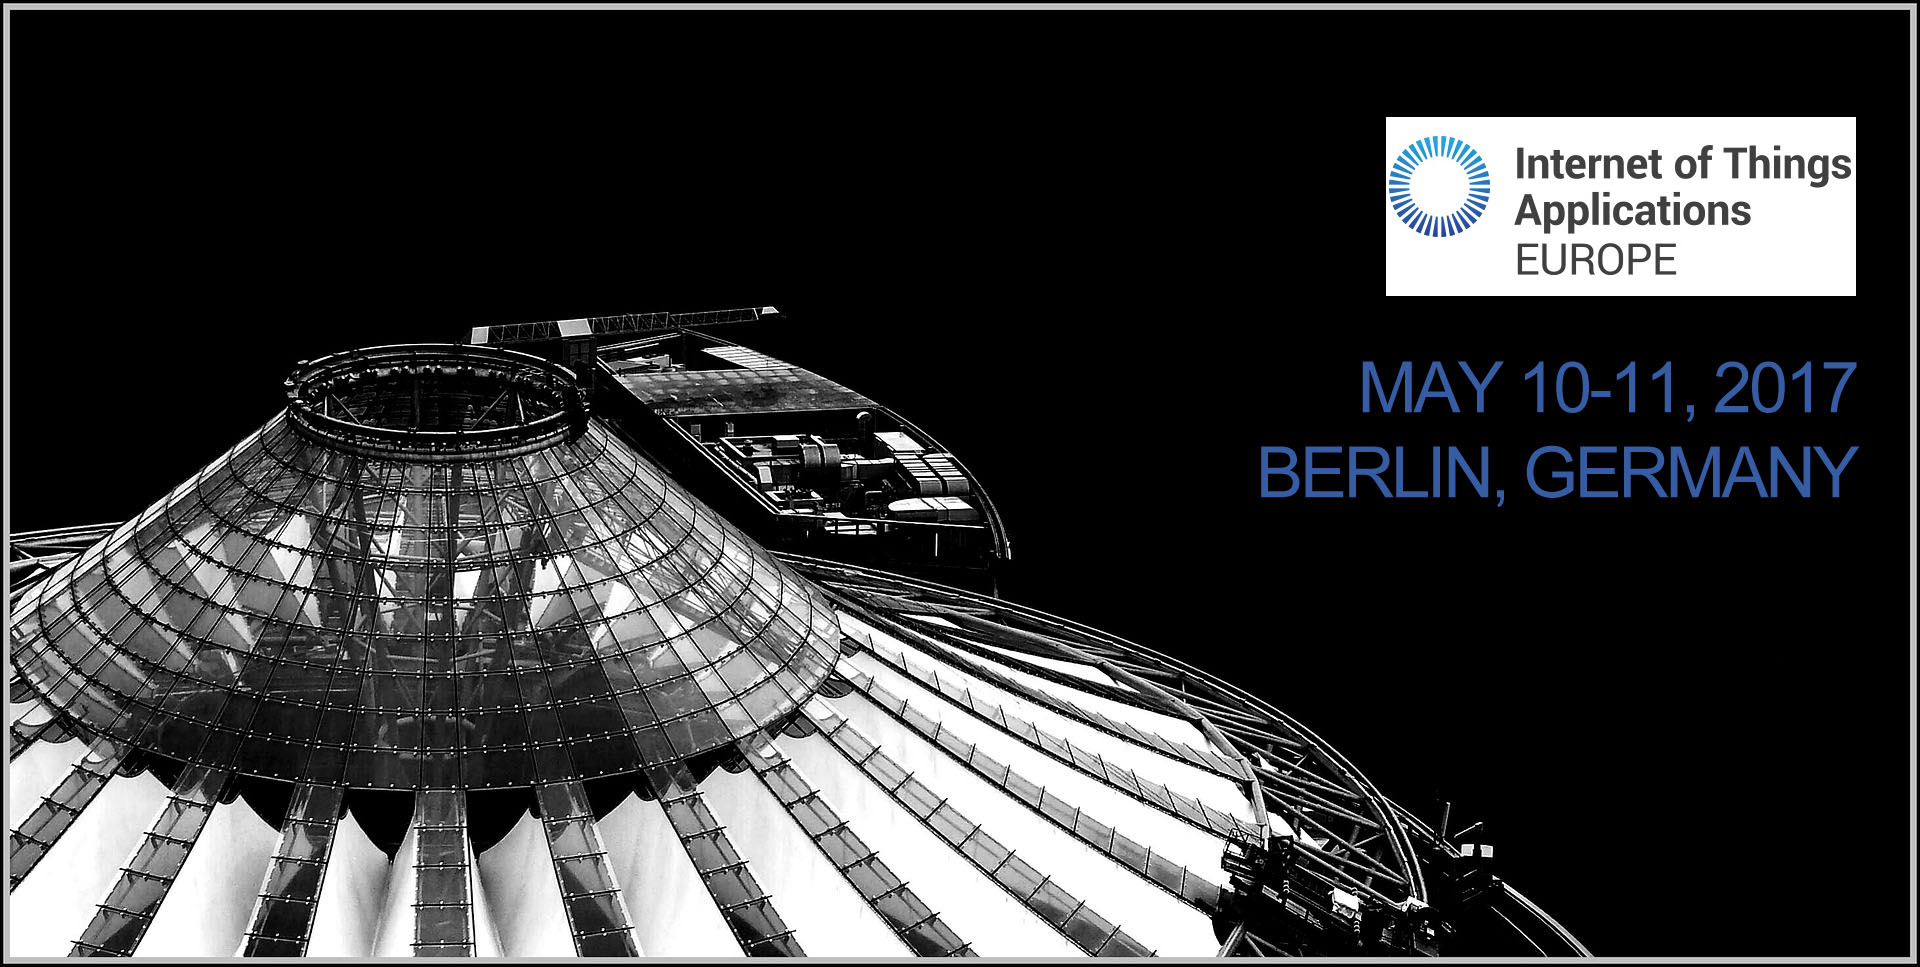 Connecting the Edge - IDTechEx Show on IoT Europe on May 10-11,2017 in Berlin, Germany